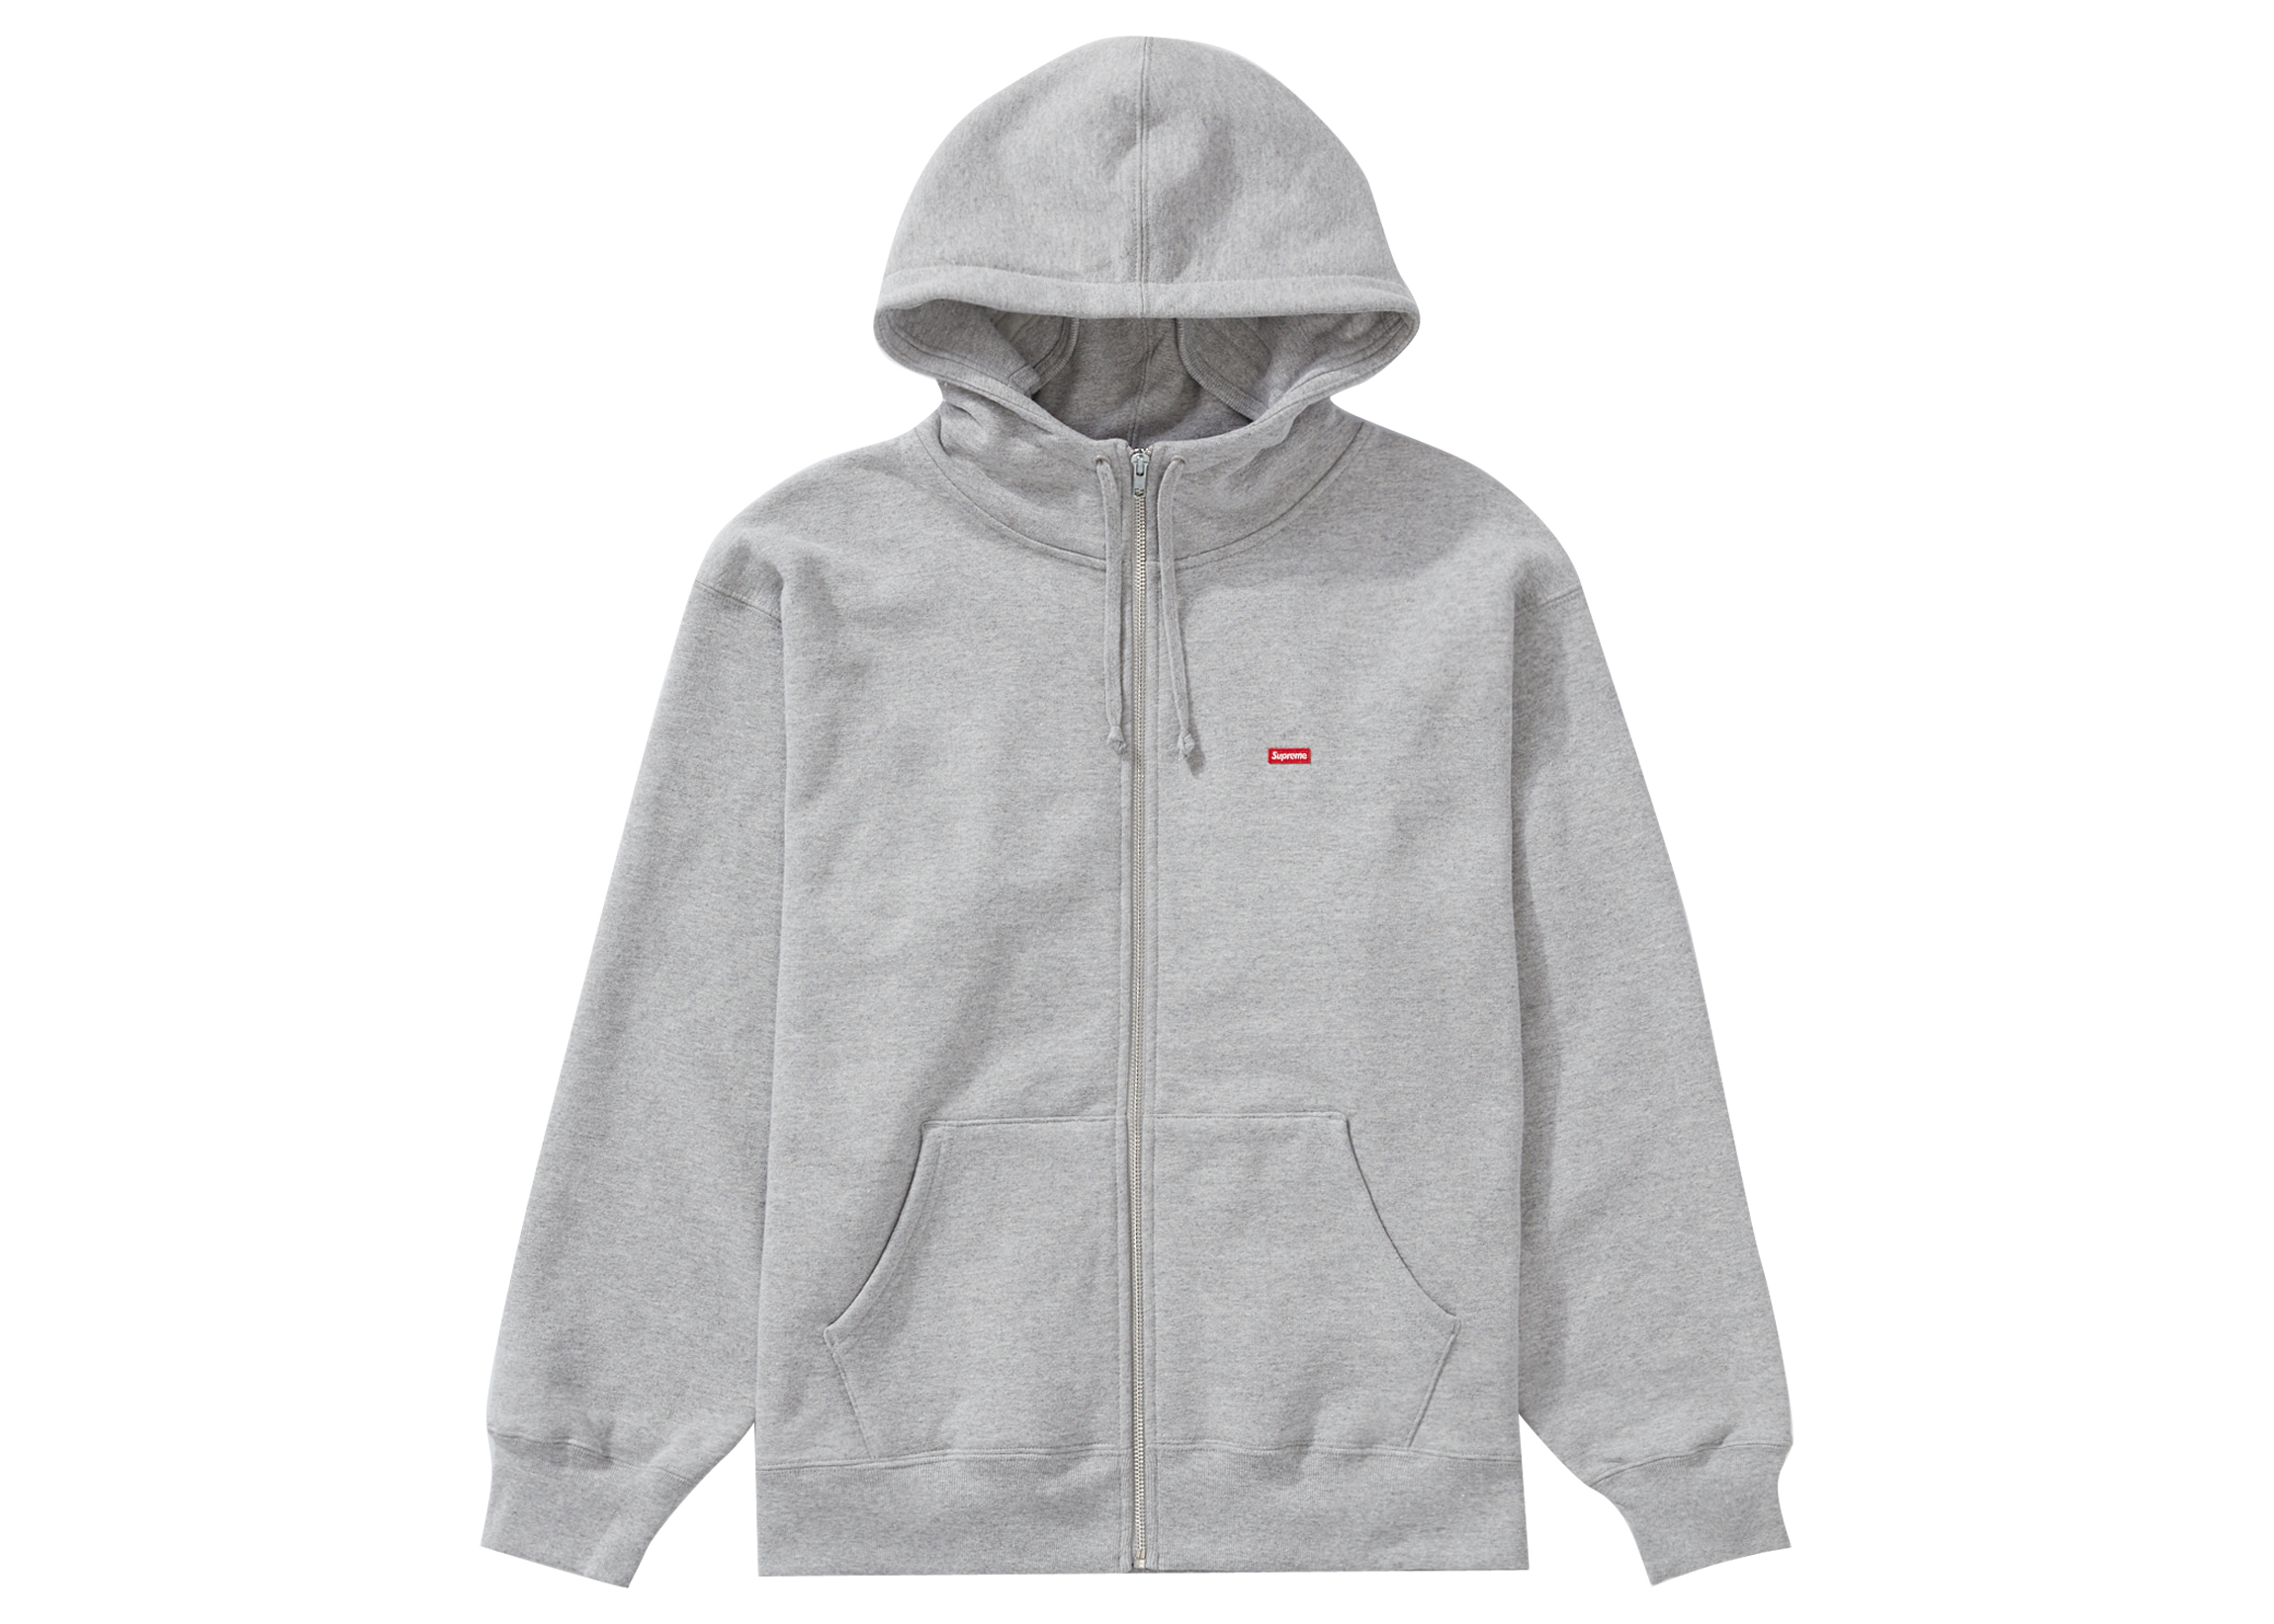 Supreme Small Box Facemask Zip Up Hooded